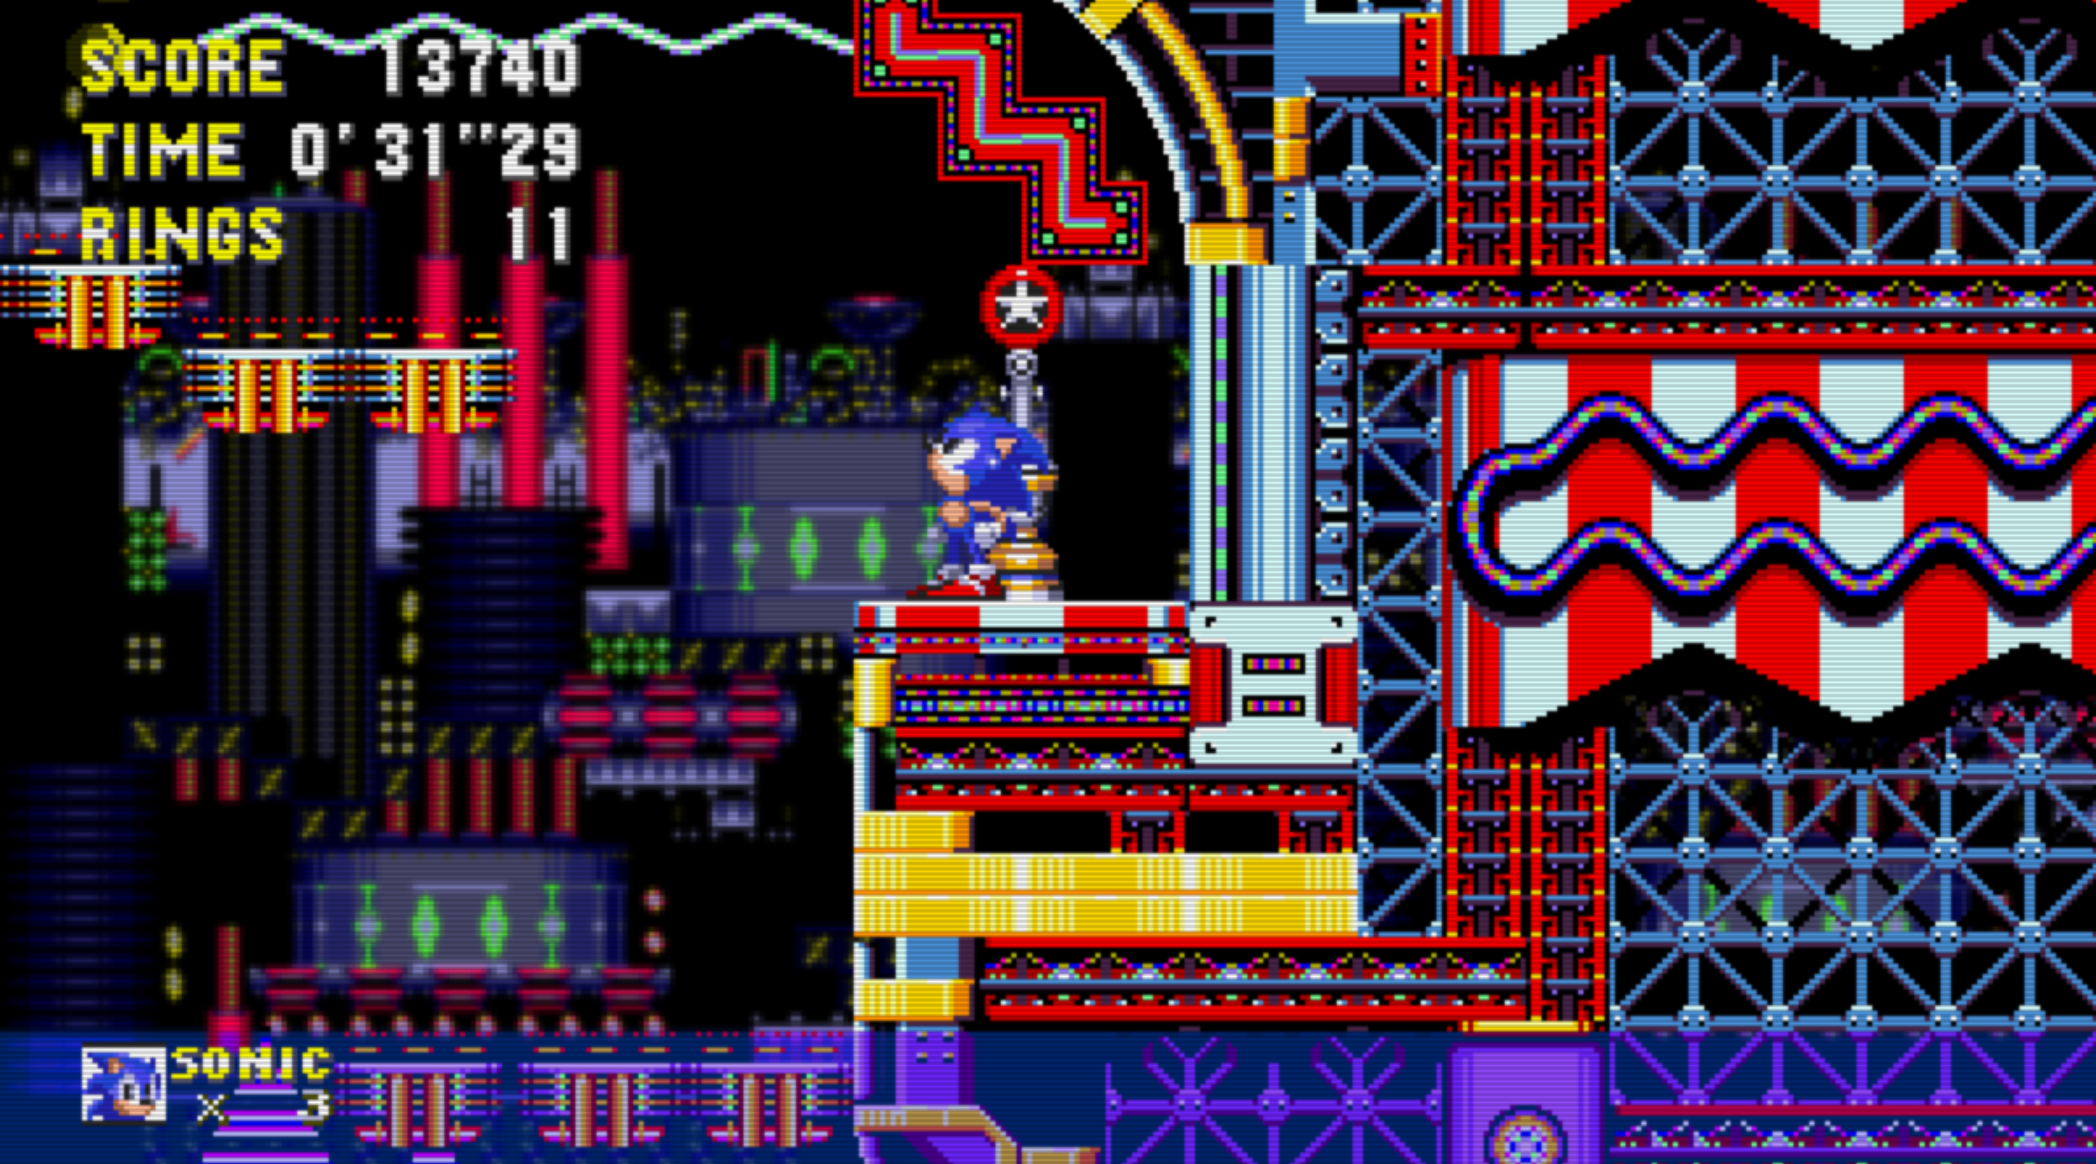 Sonic 3 mode. Sonic 3 Air. Sonic 3 Air ROM. Sonic 3 and Knuckles ROM АИР. Sonic 3 Air Android.